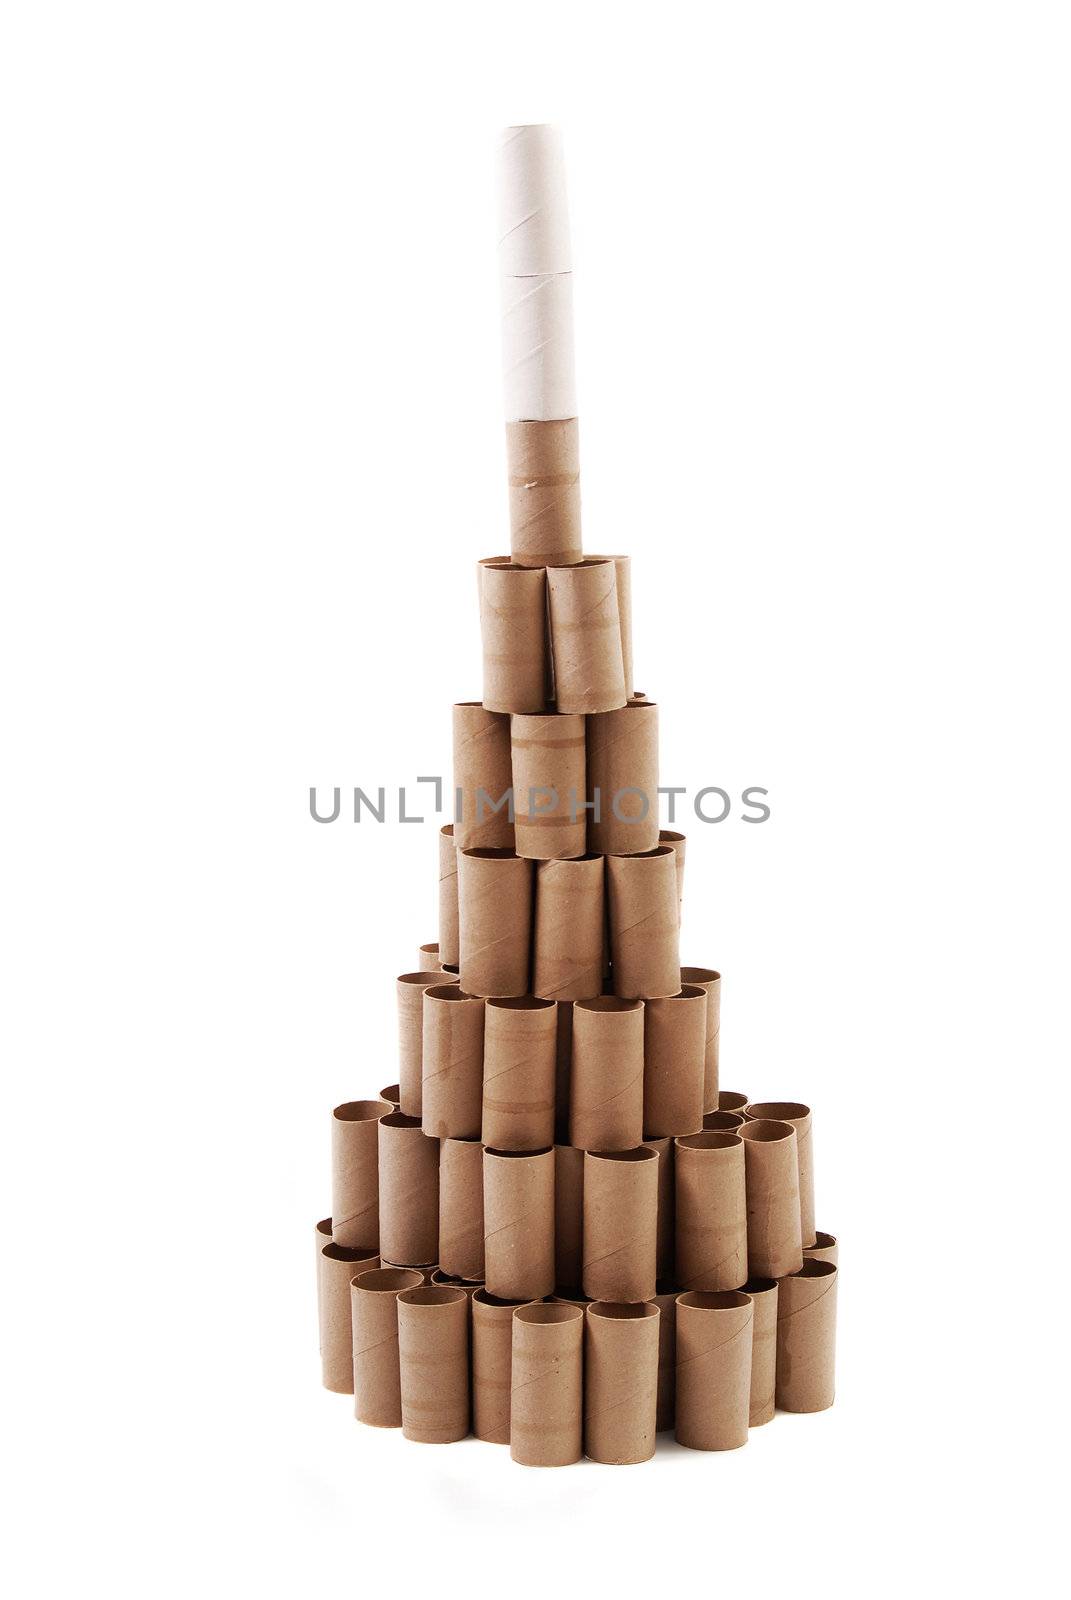 Christmas Tree made with cardboard rolls of toilet paper. White background